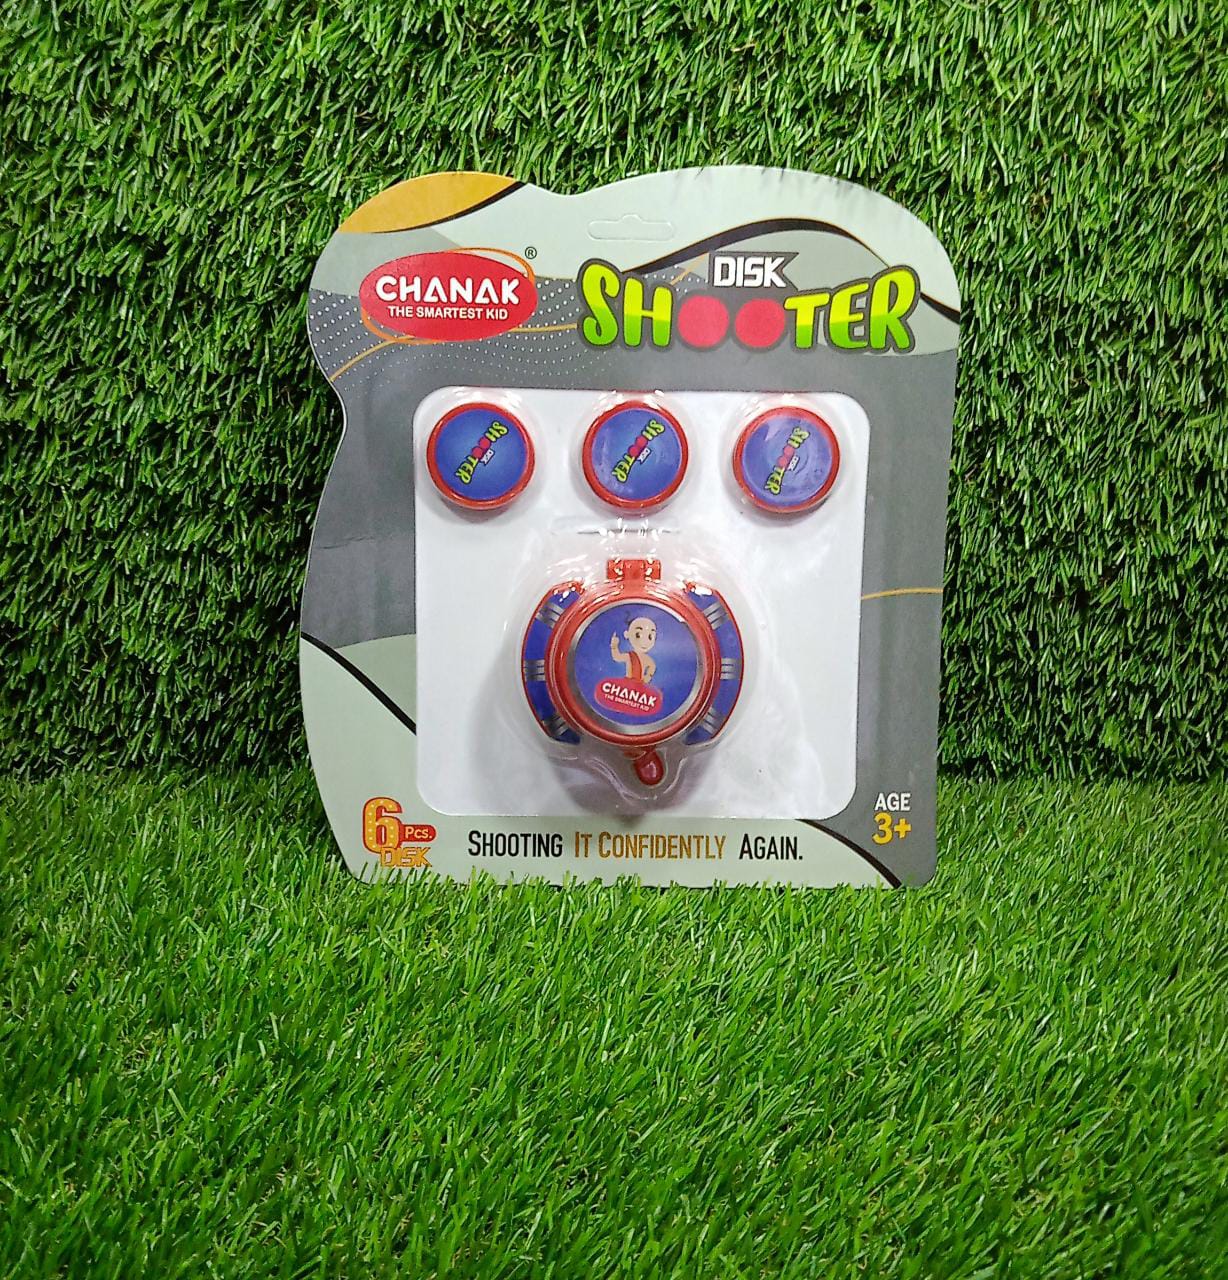 1968 EXCITING HAND DISK SHOOTER TOYS GAME SET FOR KIDS. AMAZING FLYING DISC GAME. INDOOR & OUTDOOR DeoDap